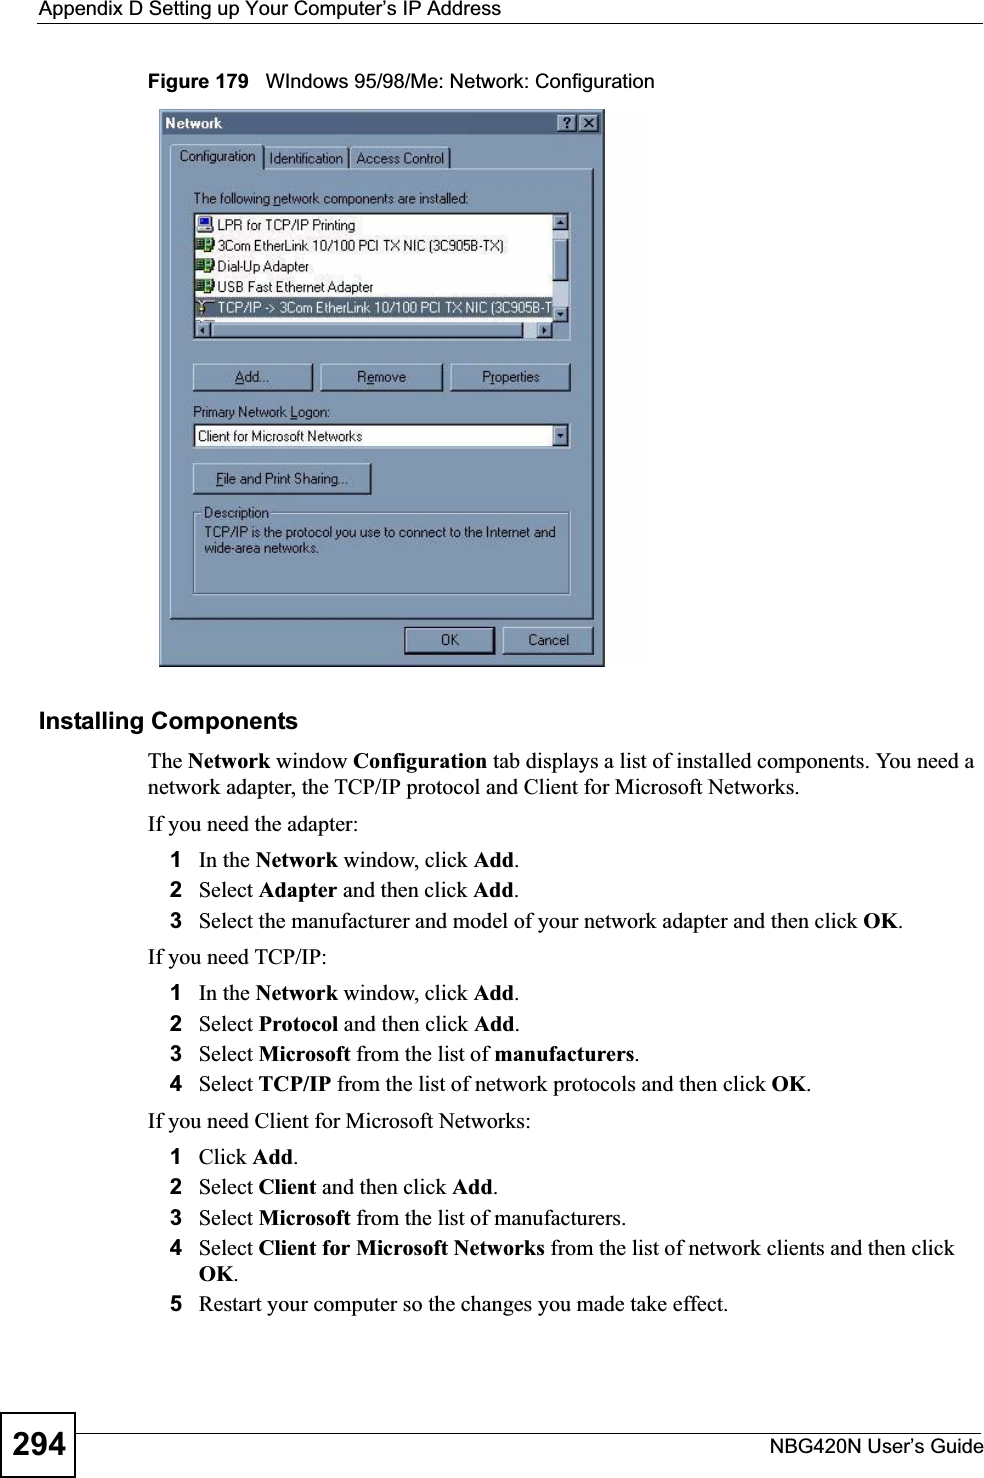 Appendix D Setting up Your Computer’s IP AddressNBG420N User’s Guide294Figure 179   WIndows 95/98/Me: Network: ConfigurationInstalling ComponentsThe Network window Configuration tab displays a list of installed components. You need a network adapter, the TCP/IP protocol and Client for Microsoft Networks.If you need the adapter:1In the Network window, click Add.2Select Adapter and then click Add.3Select the manufacturer and model of your network adapter and then click OK.If you need TCP/IP:1In the Network window, click Add.2Select Protocol and then click Add.3Select Microsoft from the list of manufacturers.4Select TCP/IP from the list of network protocols and then click OK.If you need Client for Microsoft Networks:1Click Add.2Select Client and then click Add.3Select Microsoft from the list of manufacturers.4Select Client for Microsoft Networks from the list of network clients and then click OK.5Restart your computer so the changes you made take effect.